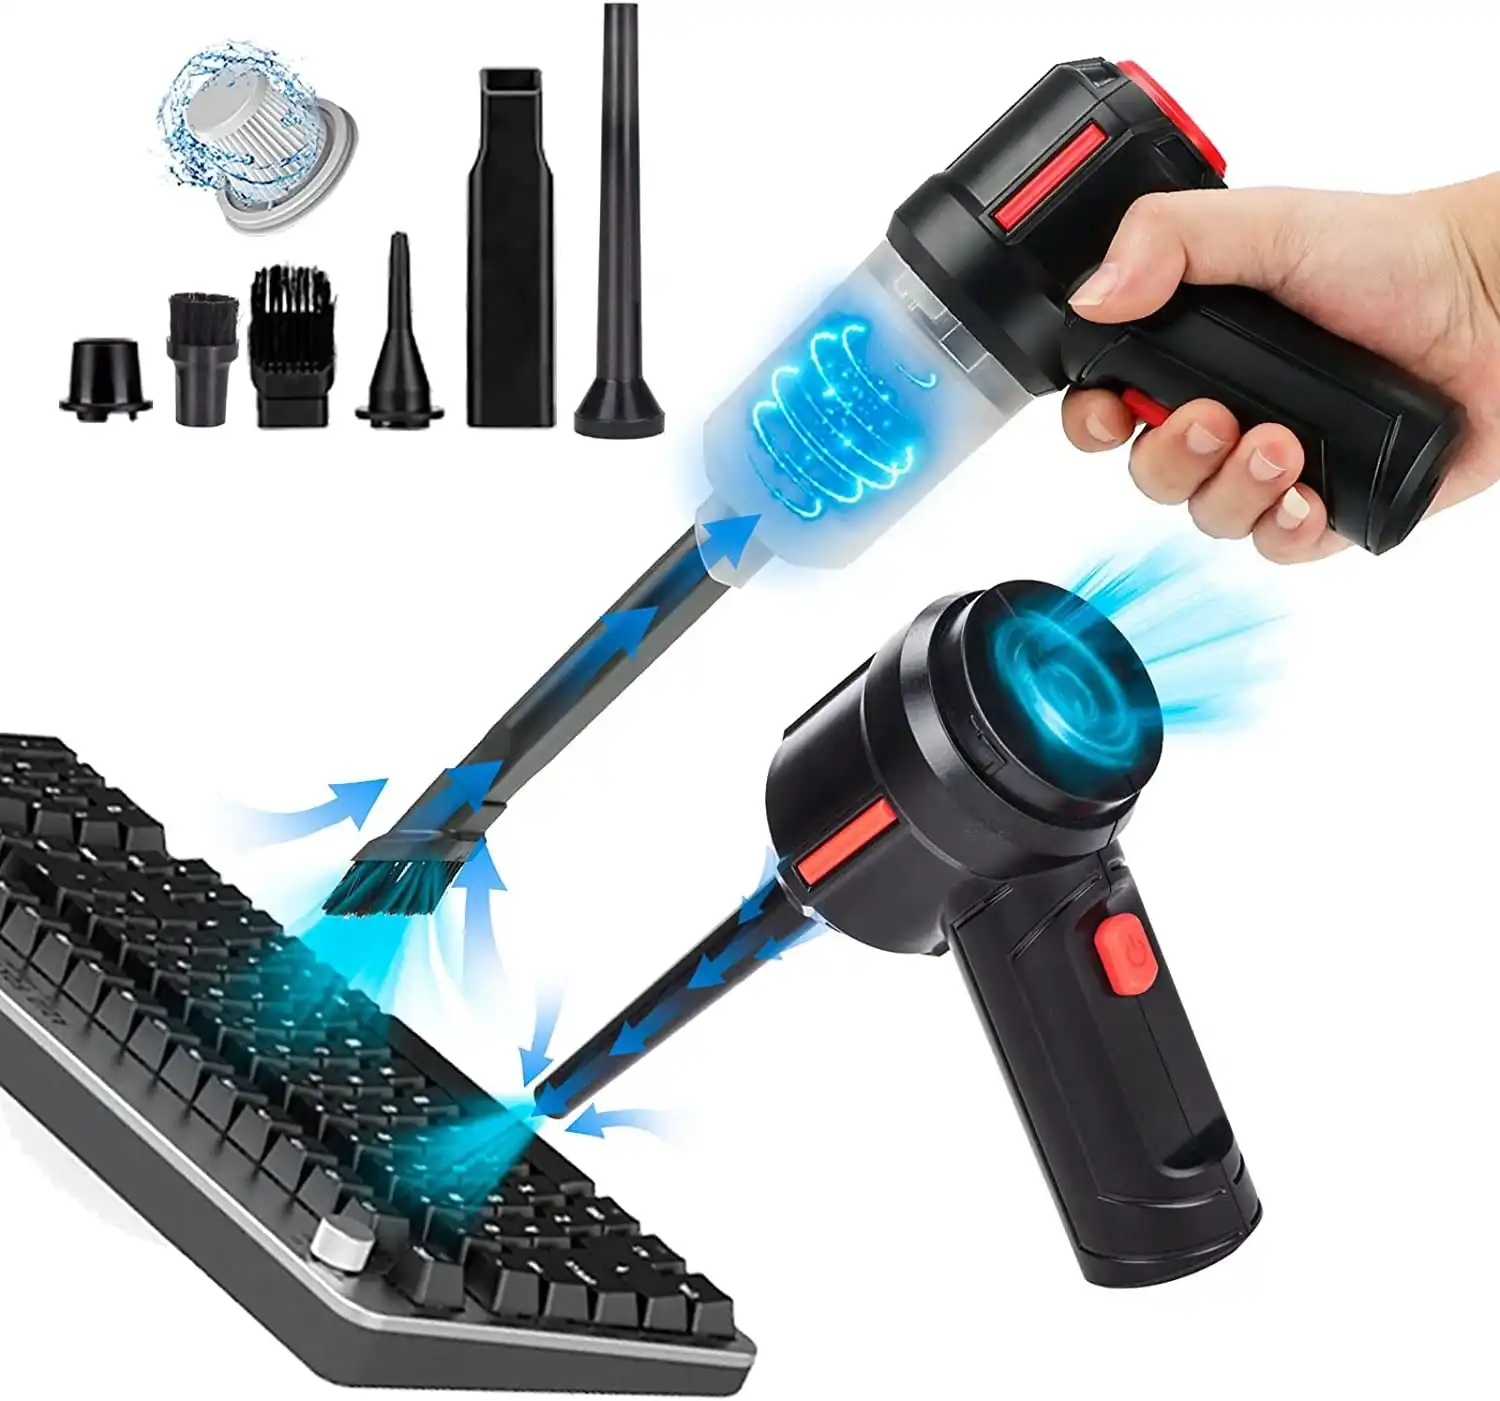 Meudeen Electric Air Duster for Keyboard Cleaning- Rechargeable Air Duster for Computer Cleaning- Compressed Air Duster- Mini Vacuum- Keyboard Cleaner 3-In-1